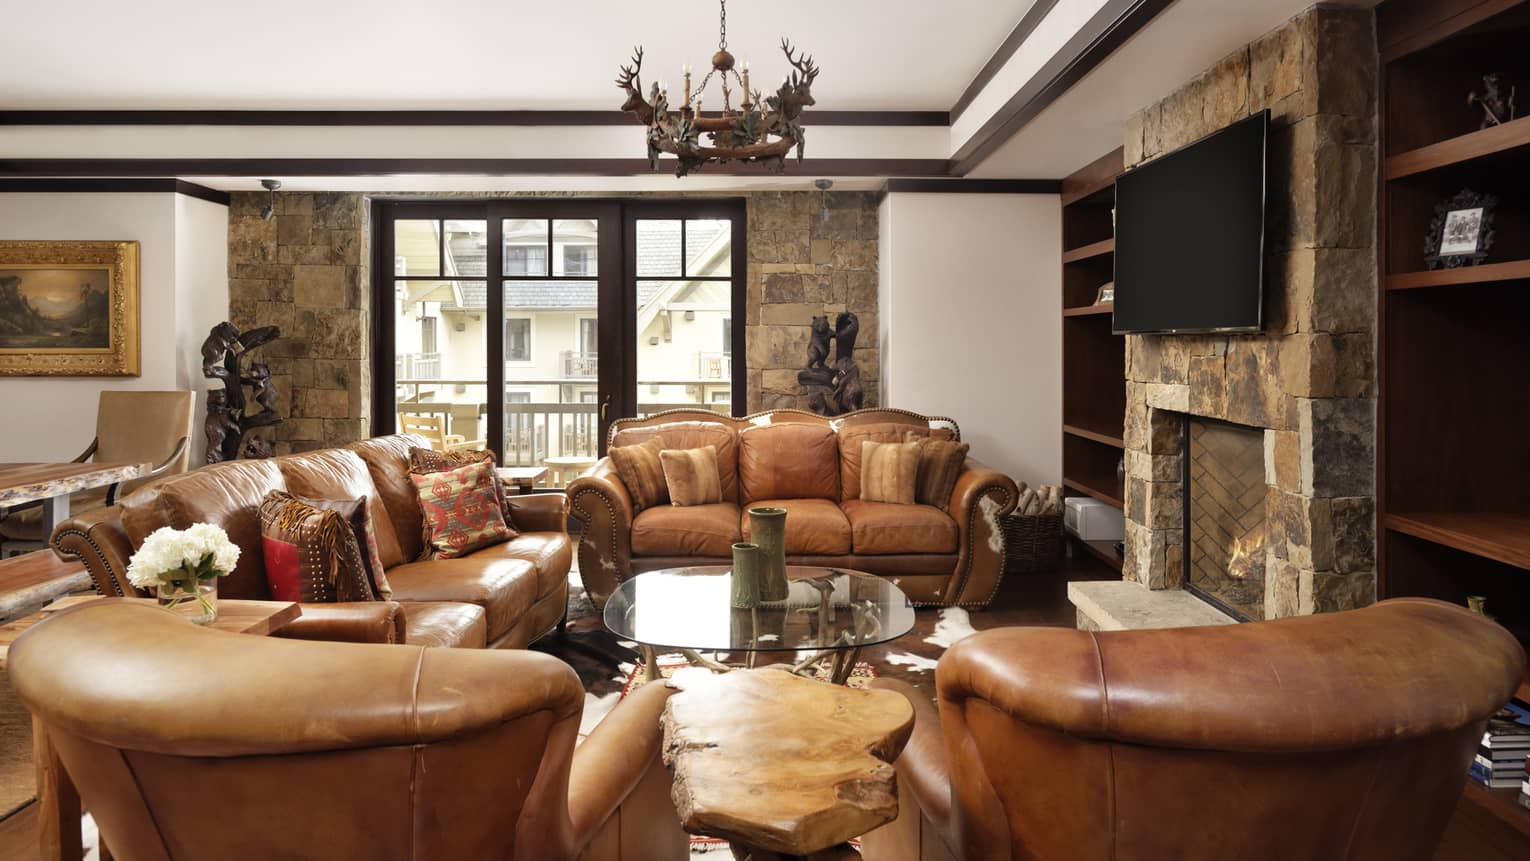 Mountain-chic living room with two brown leather sofas, two matching arm chairs, antler chandelier